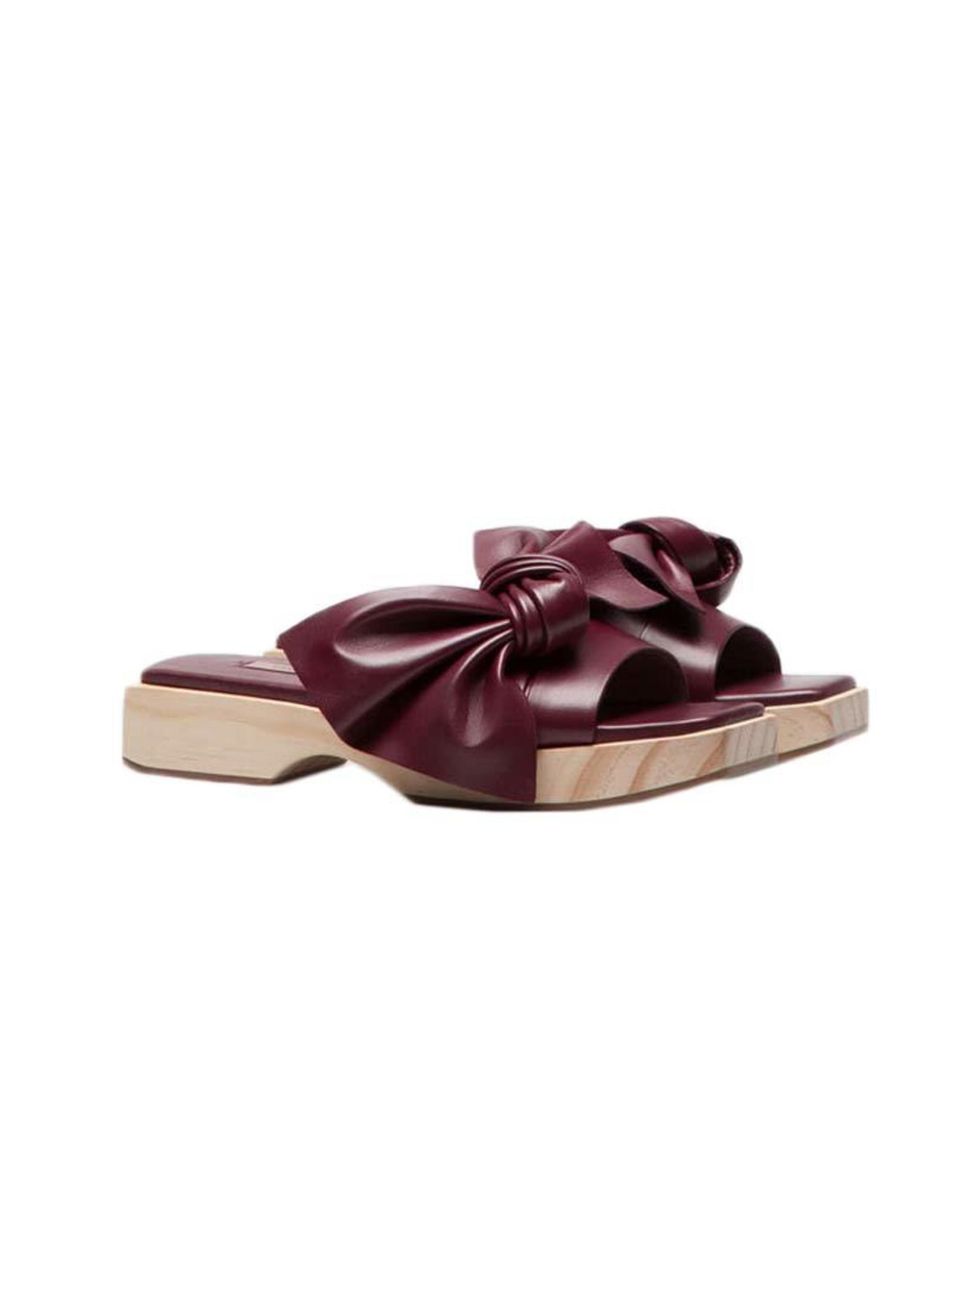 <p>A statement sandal will breathe new life into a tried-and-tested summer wardrobe of blue jeans and white t-shirts.</p>

<p><a href="http://www.uterque.com/gb/en/new-in-store/wooden-sandals-with-bow-c96511p5659003.html?color=021" target="_blank">Uterqüe